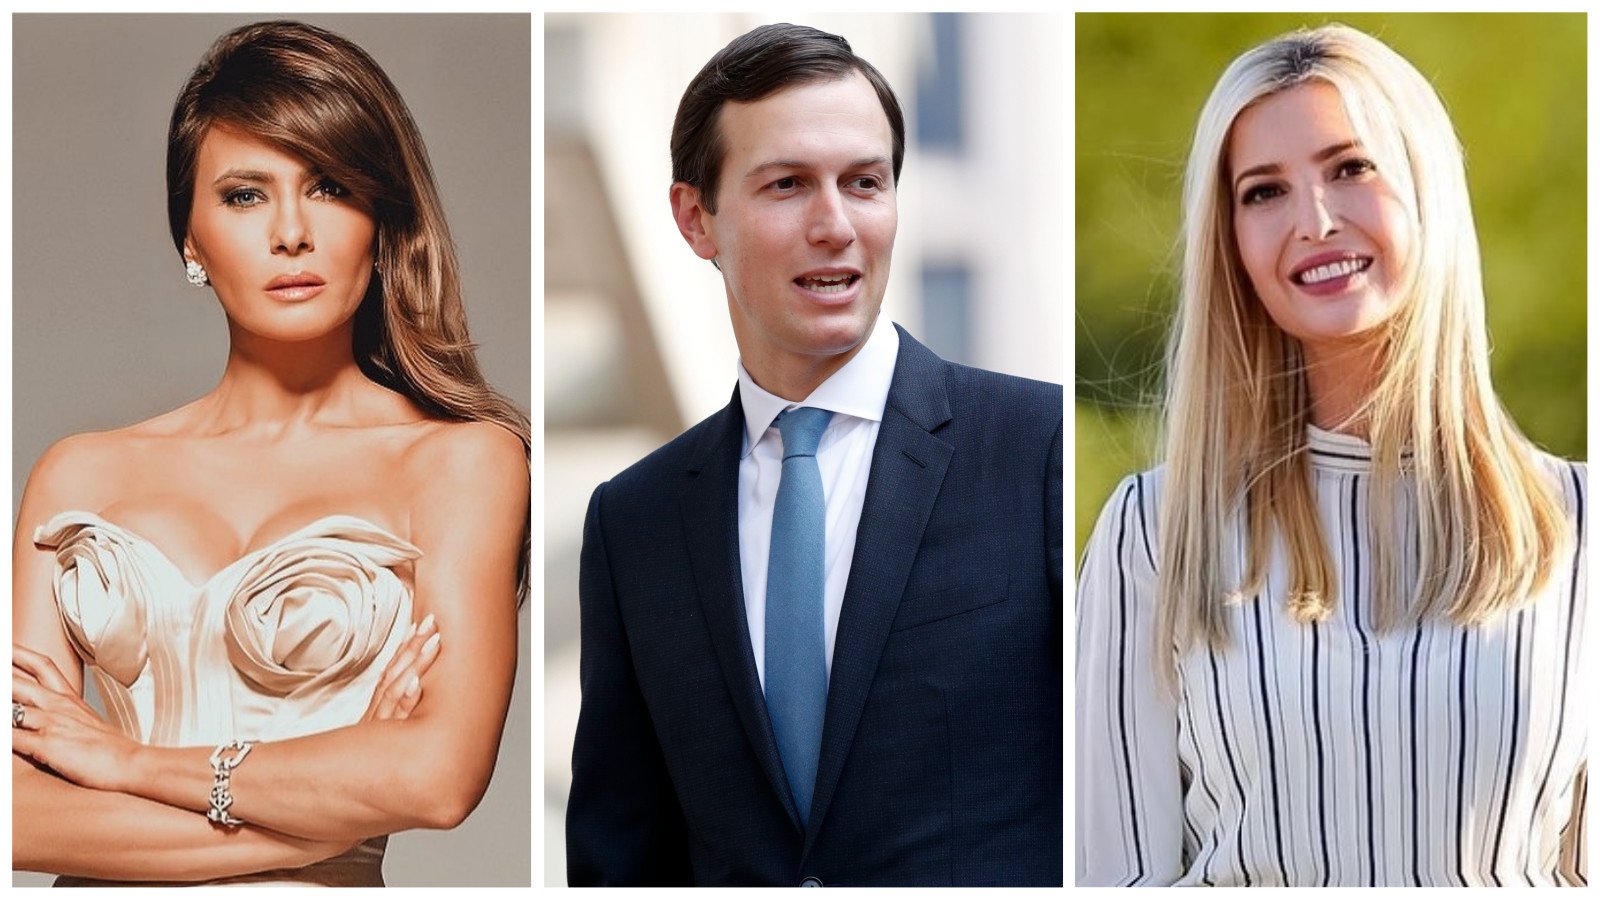 From “Rapunzel” to “Slim Reaper” and “The Interns”, the Trump family has had some unflattering nicknames. Photos: AP; @firstfamilytrumps_, @ivankatrump/Instagram